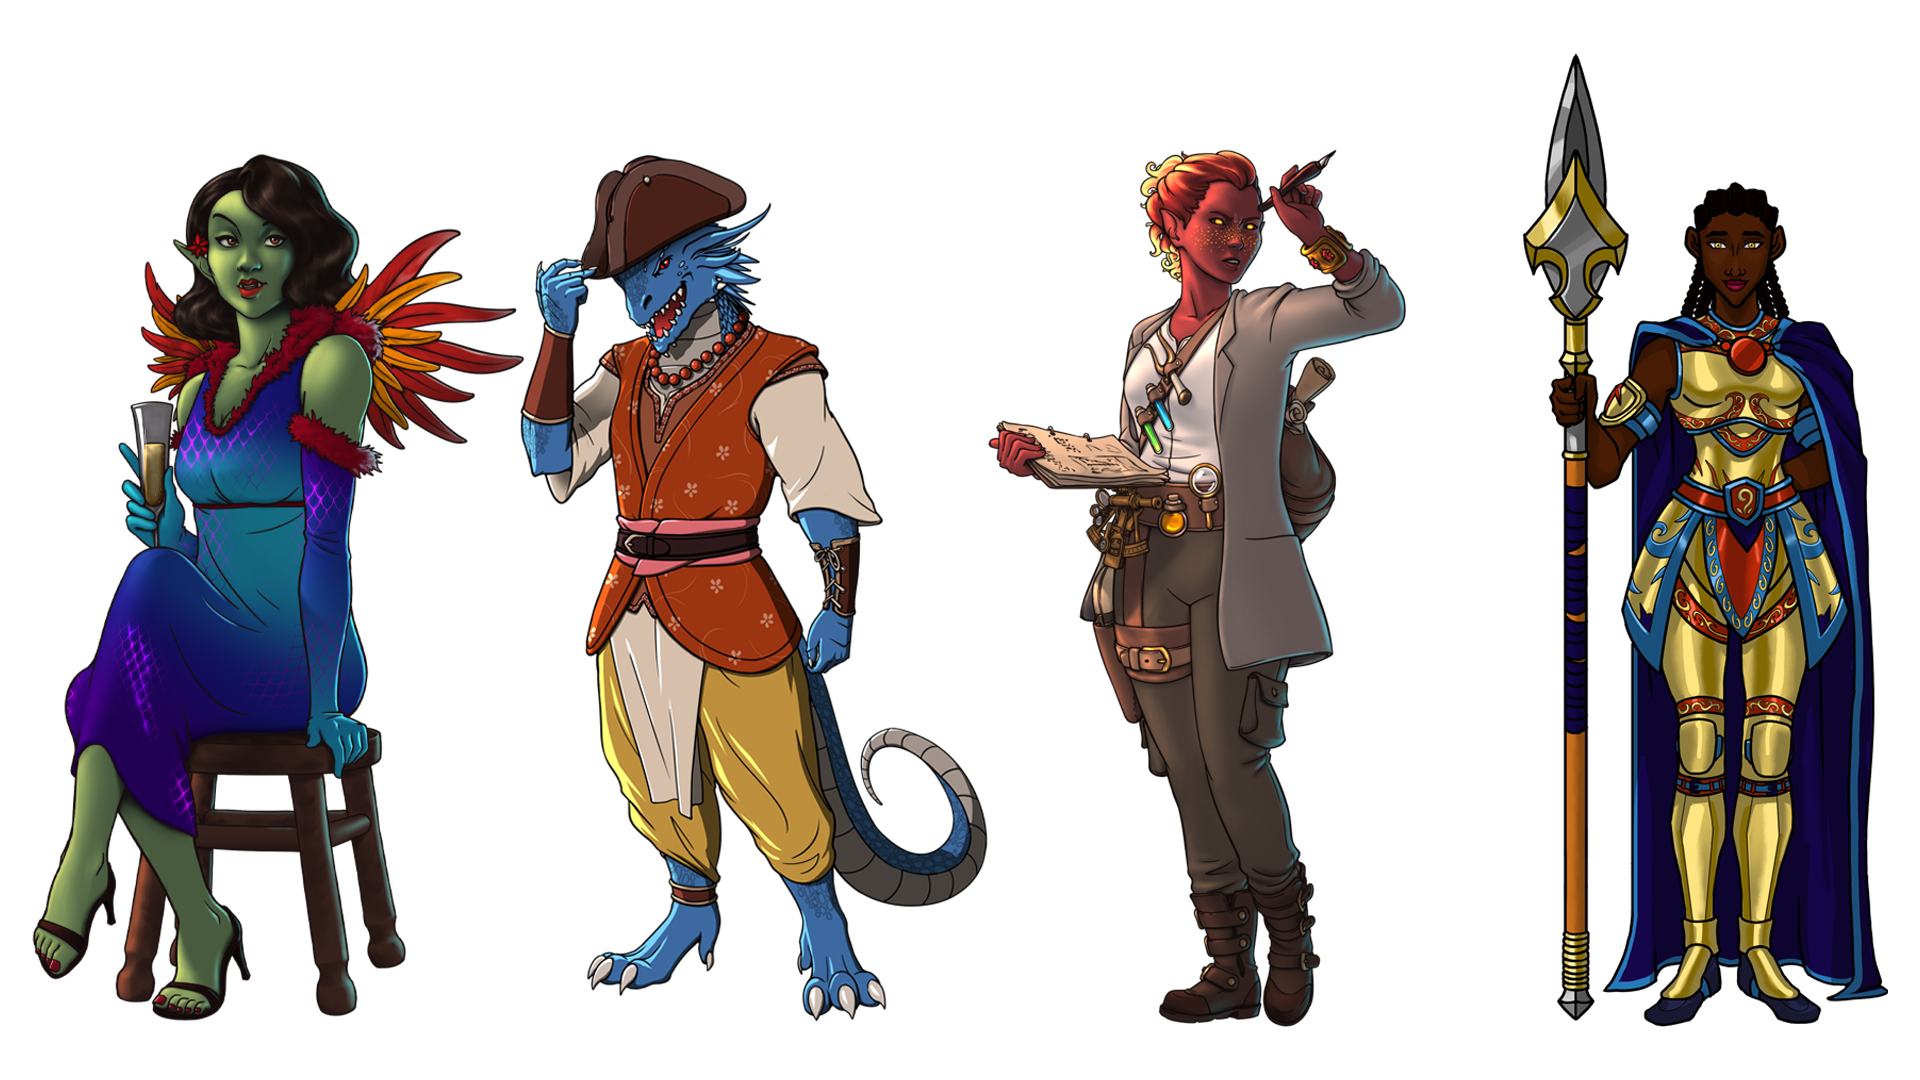 Character artwork for Anasi's Tapestry of Lives.